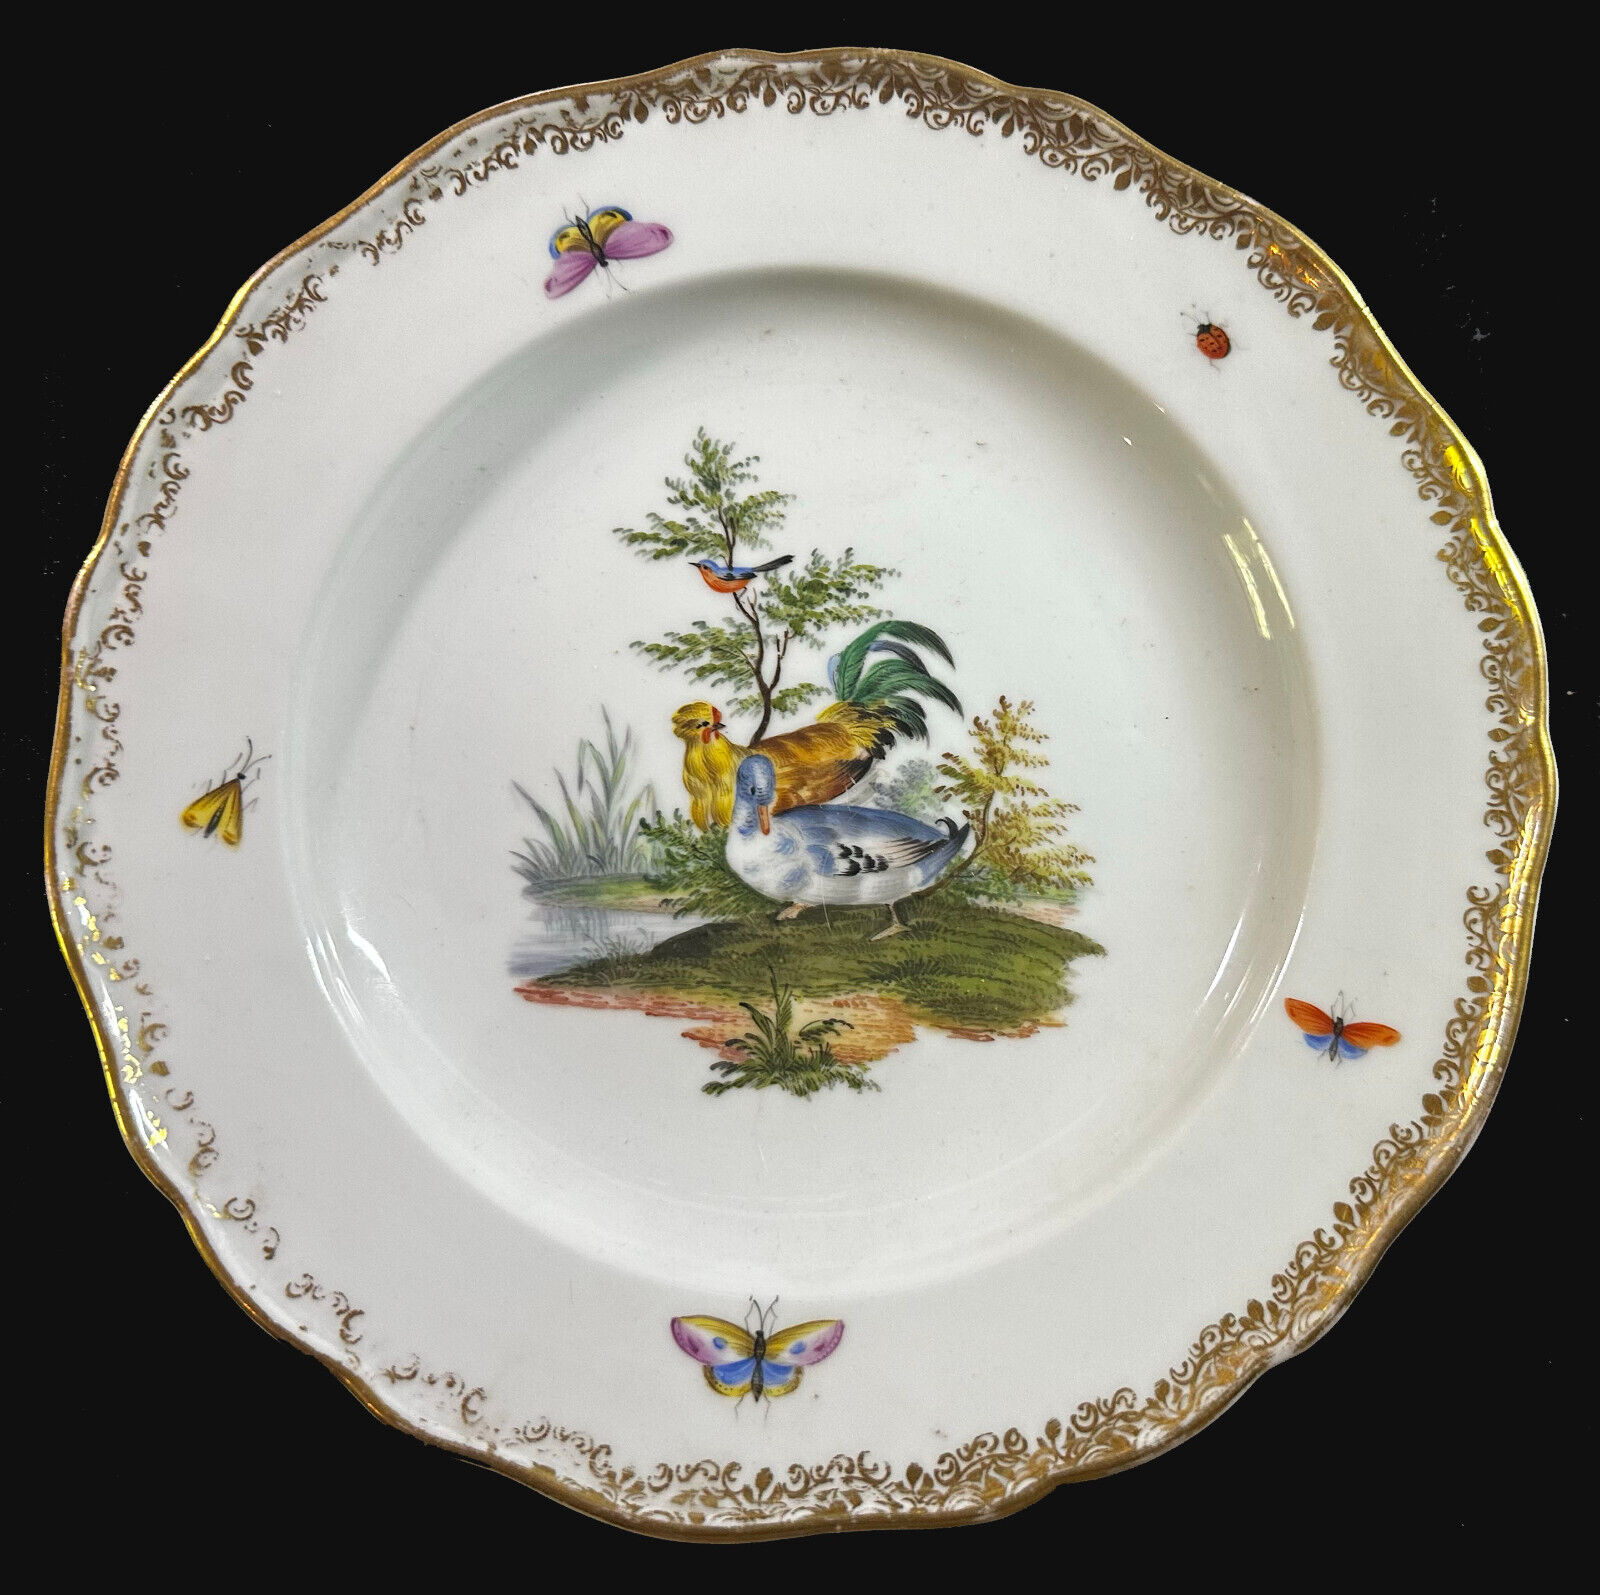 A rare 19th Century Meissen Plate decorated privately with birds and insects